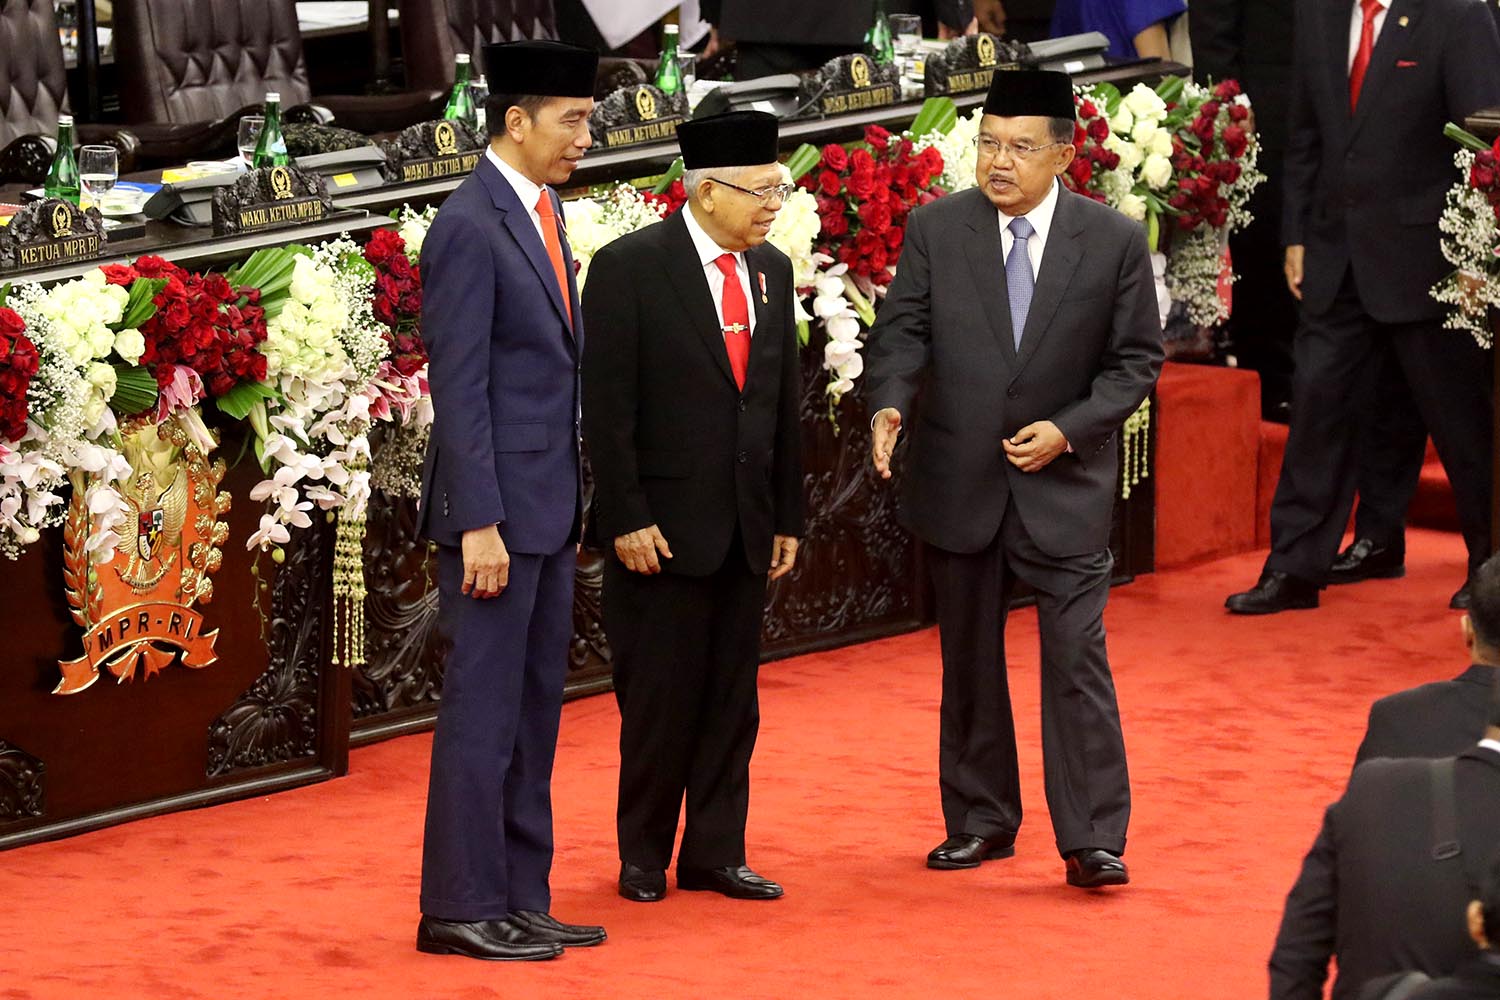 (Left to right), Indonesian president Joko "Jokowi" Widodo, vice president Ma'ruf Amin and former vice president Jusuf Kalla stand for a photo session after taking their oath as President and vice president for the period of 2019 to 2024 in a plenary session of the People's Consultative Assembly on Sunday. JP/Dhoni Setiawan